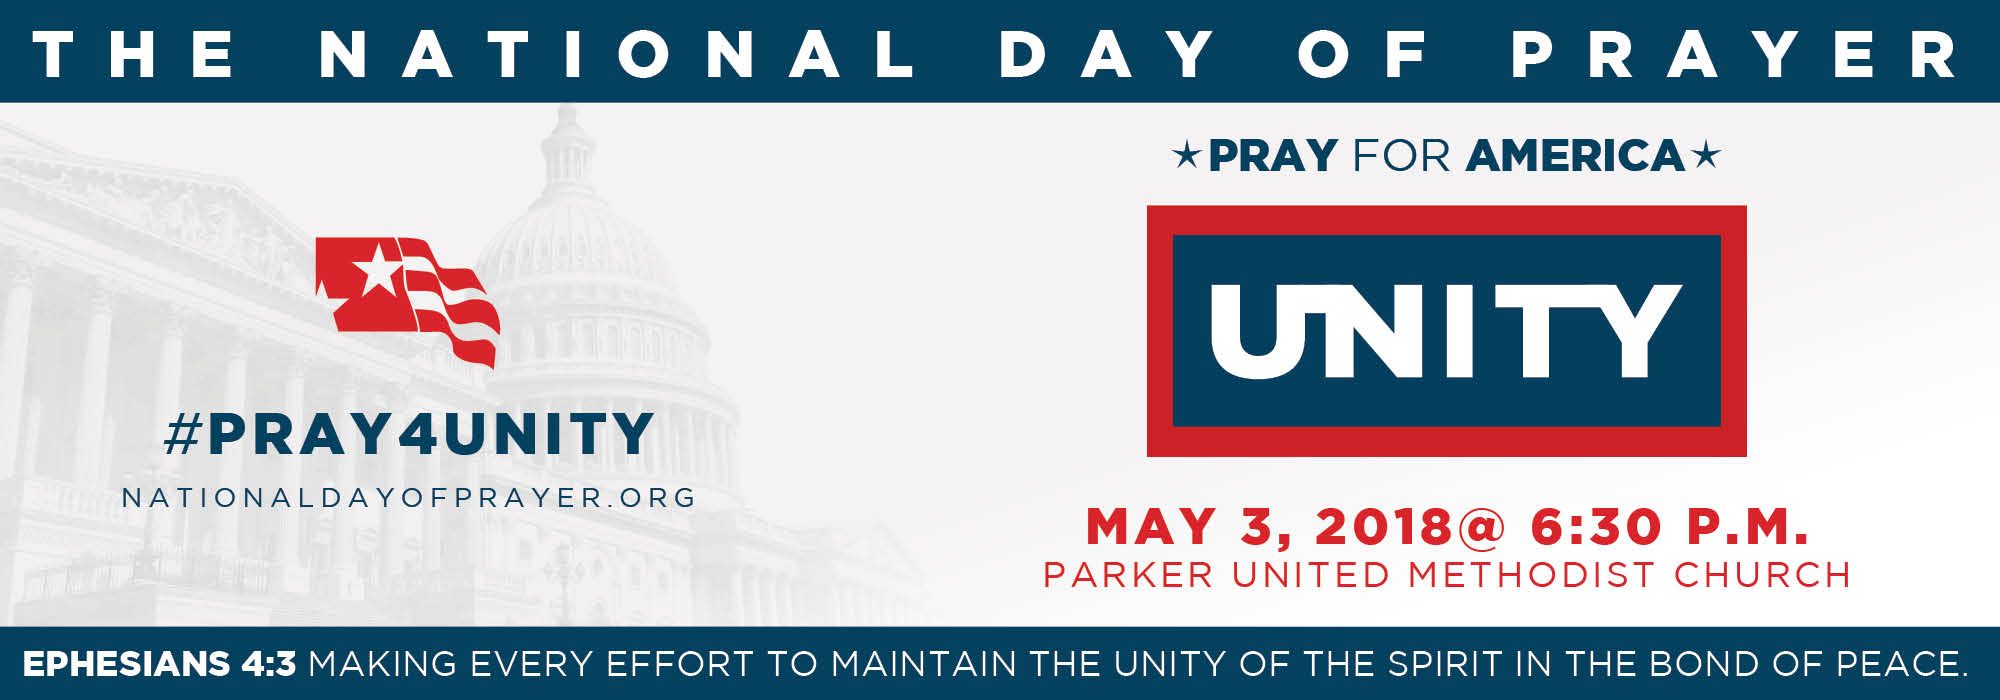 National Day of Prayer location and details.